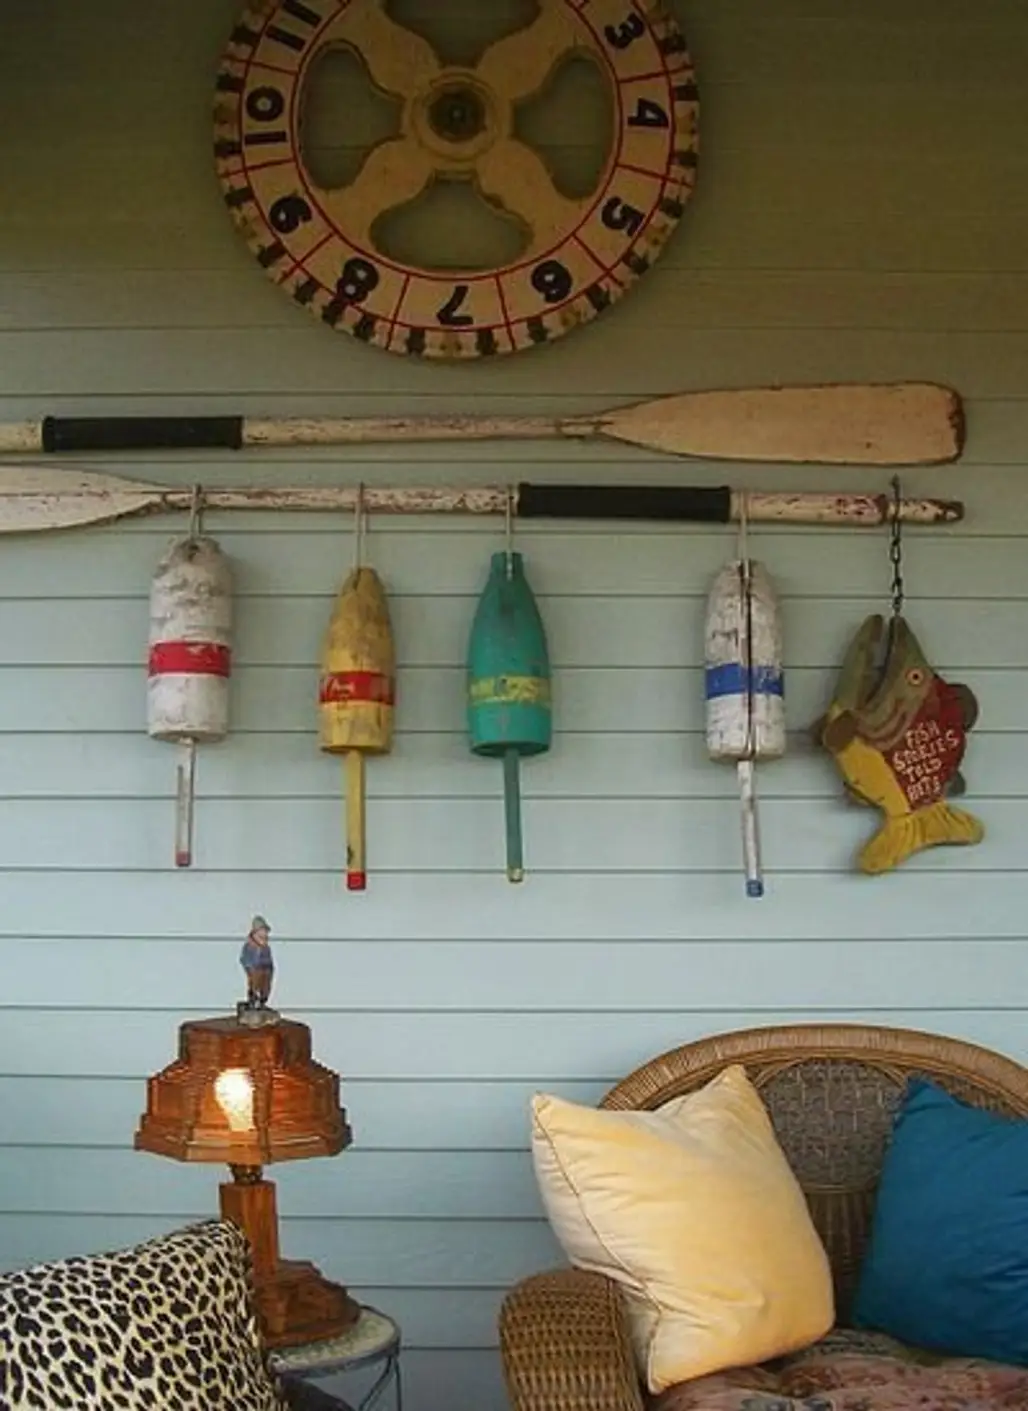 Display of Old Buoys and Oars